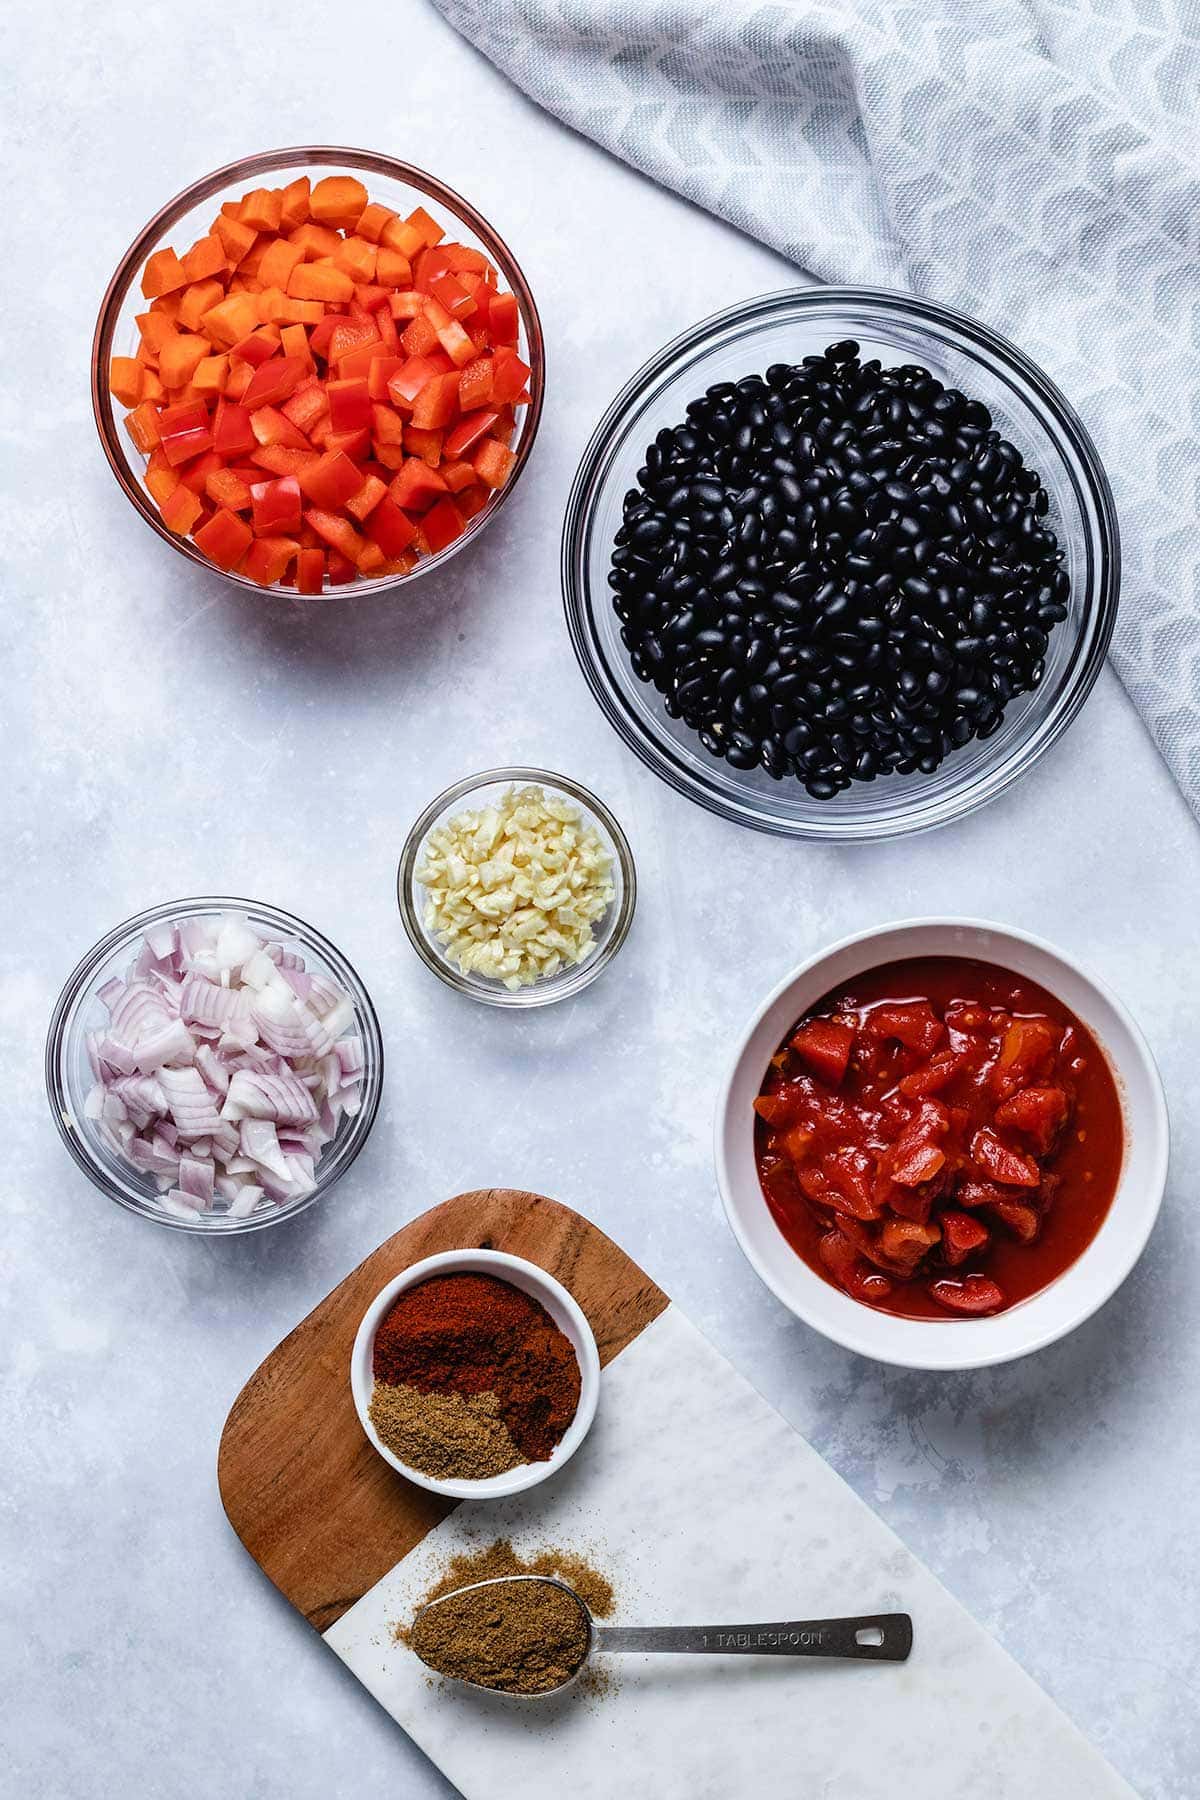 black bean soup ingredients in small bowls: diced carrots, red bell pepper, dried black beans, diced tomatoes, minced garlic, diced red onion and spices